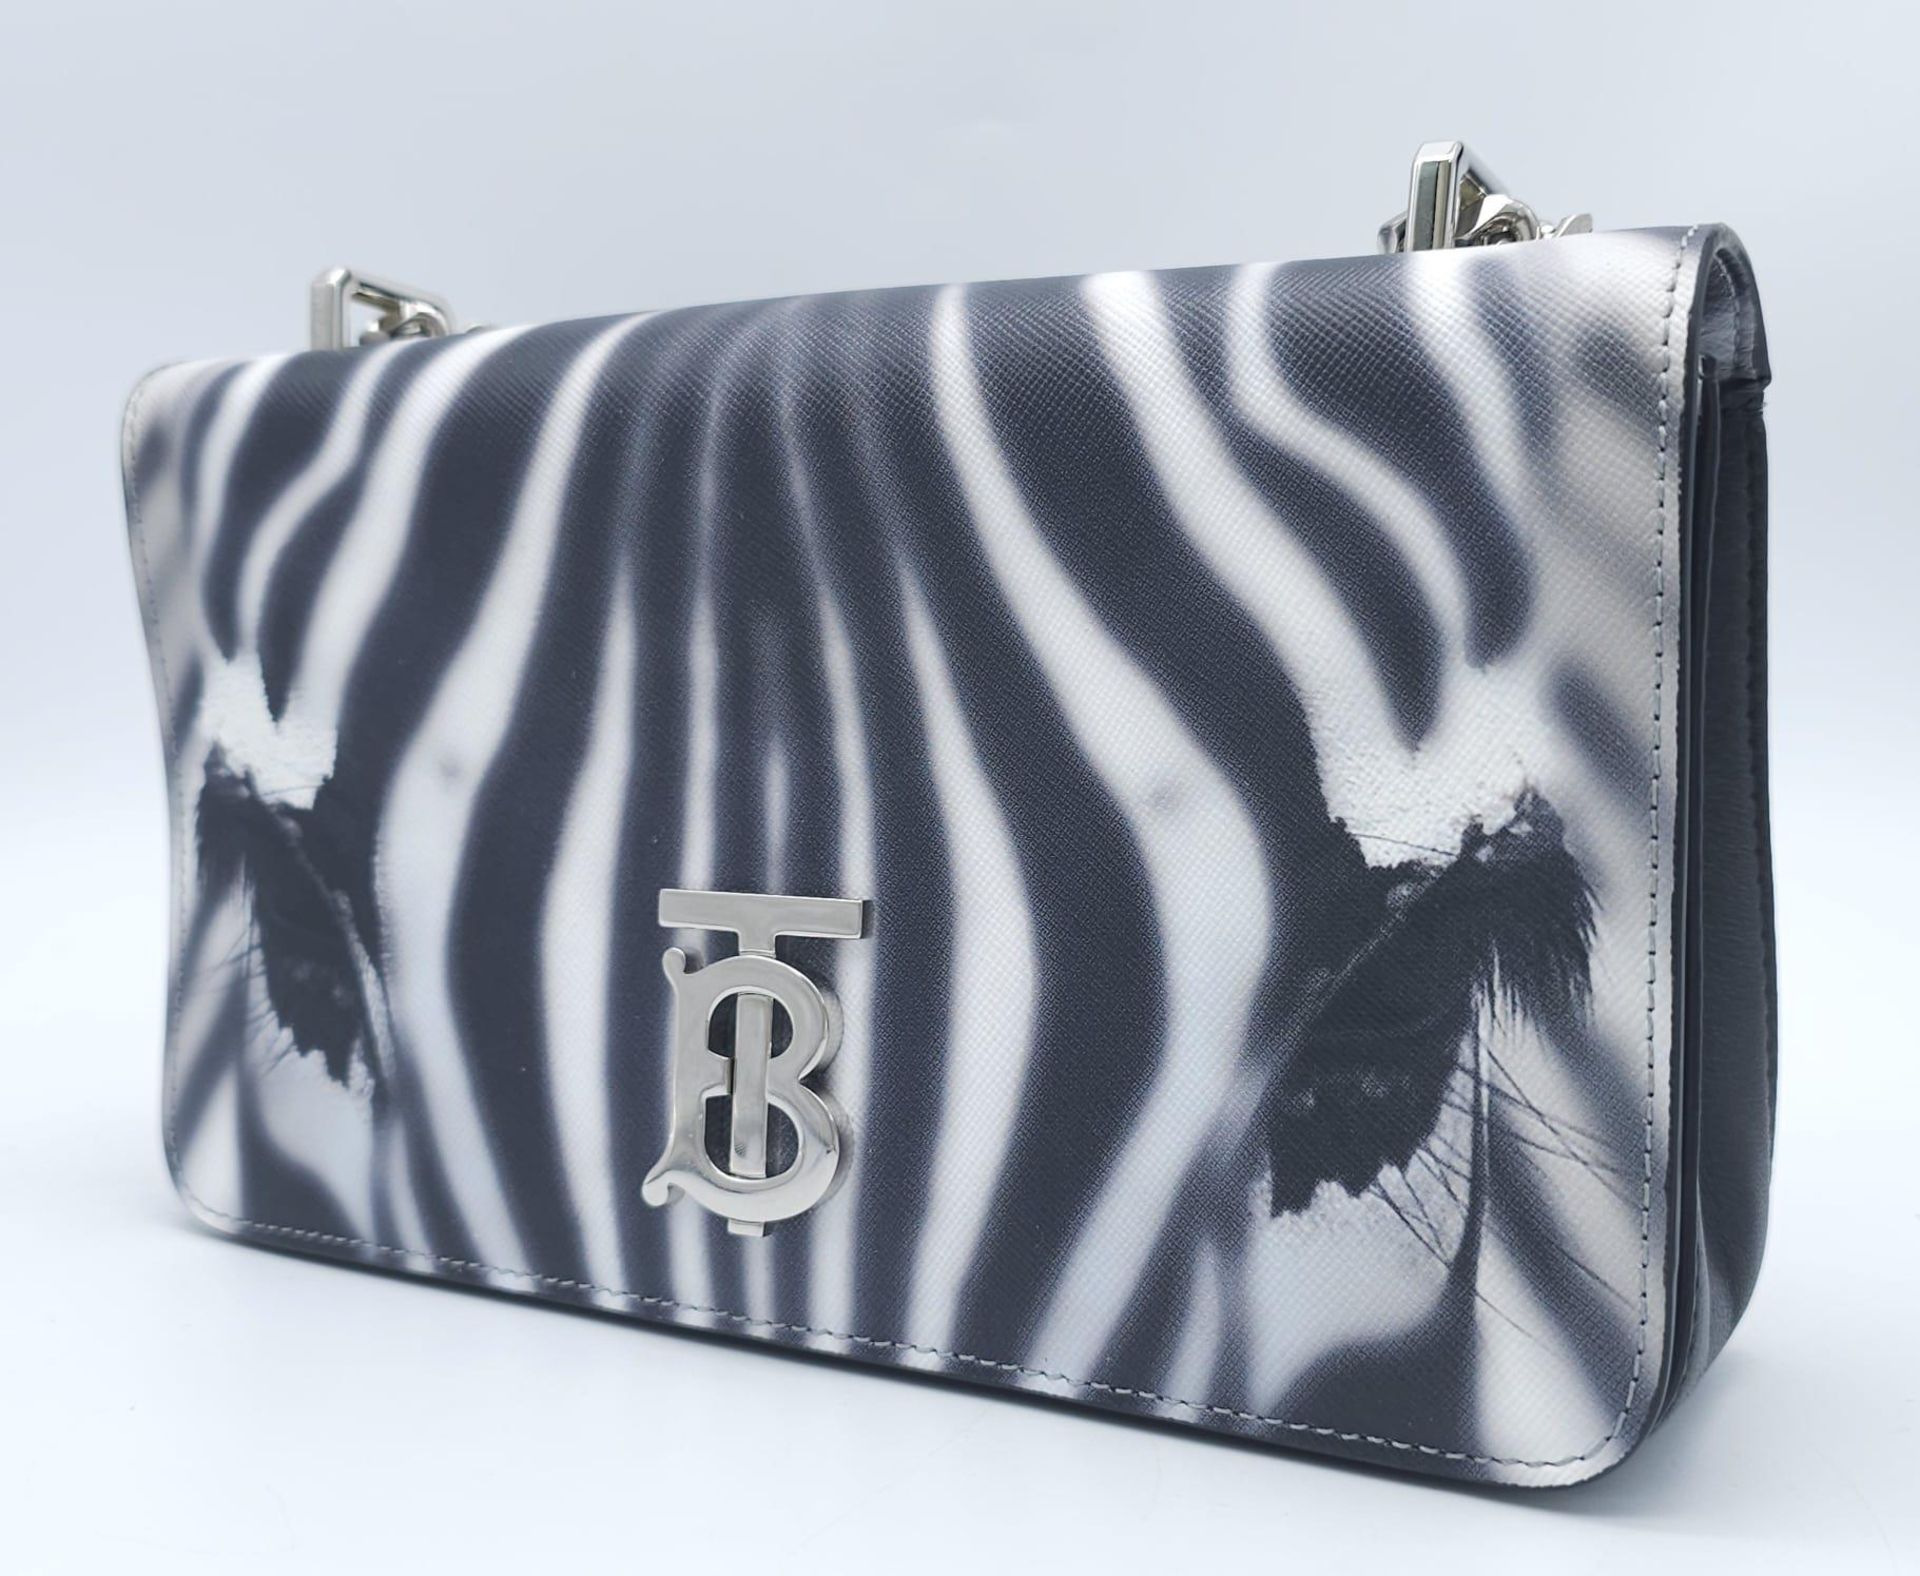 Burberry Zebra Chain Shoulder Bag. Quality leather throughout with a gorgeous print of a Zebra. - Image 3 of 13